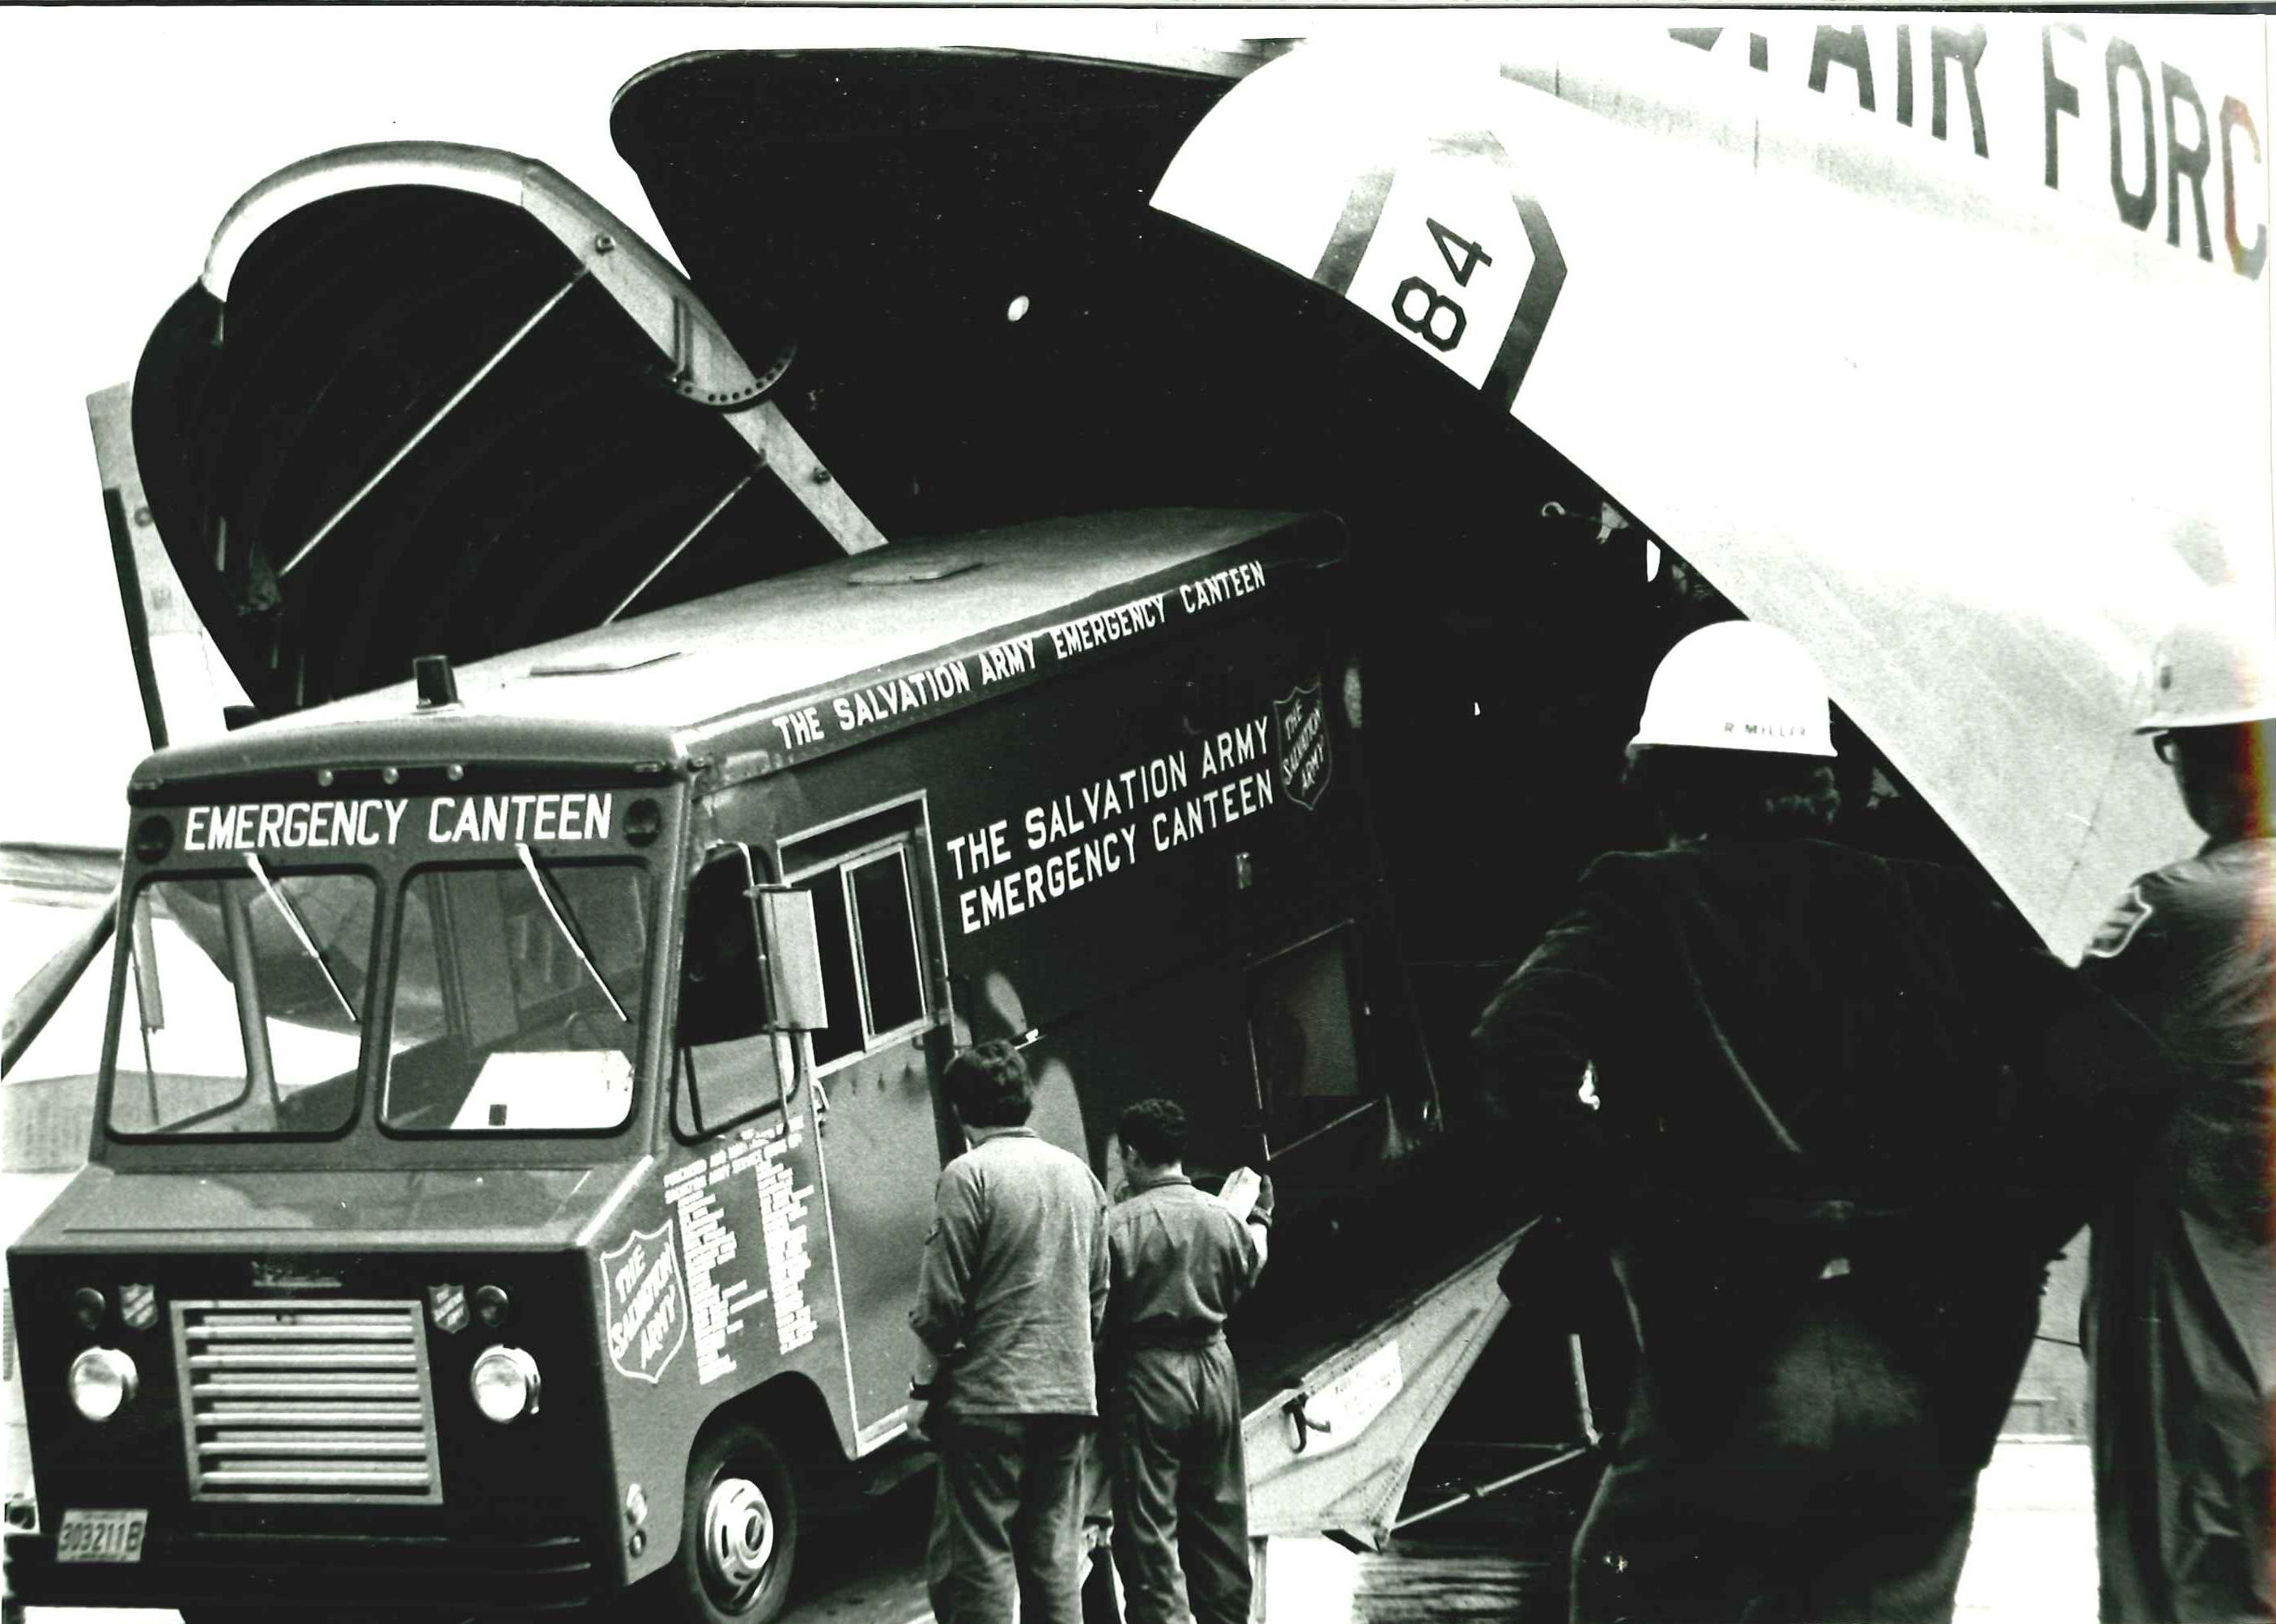 A Salvation Army canteen vehicle shown coming off of a United States Air Force cargo plane.